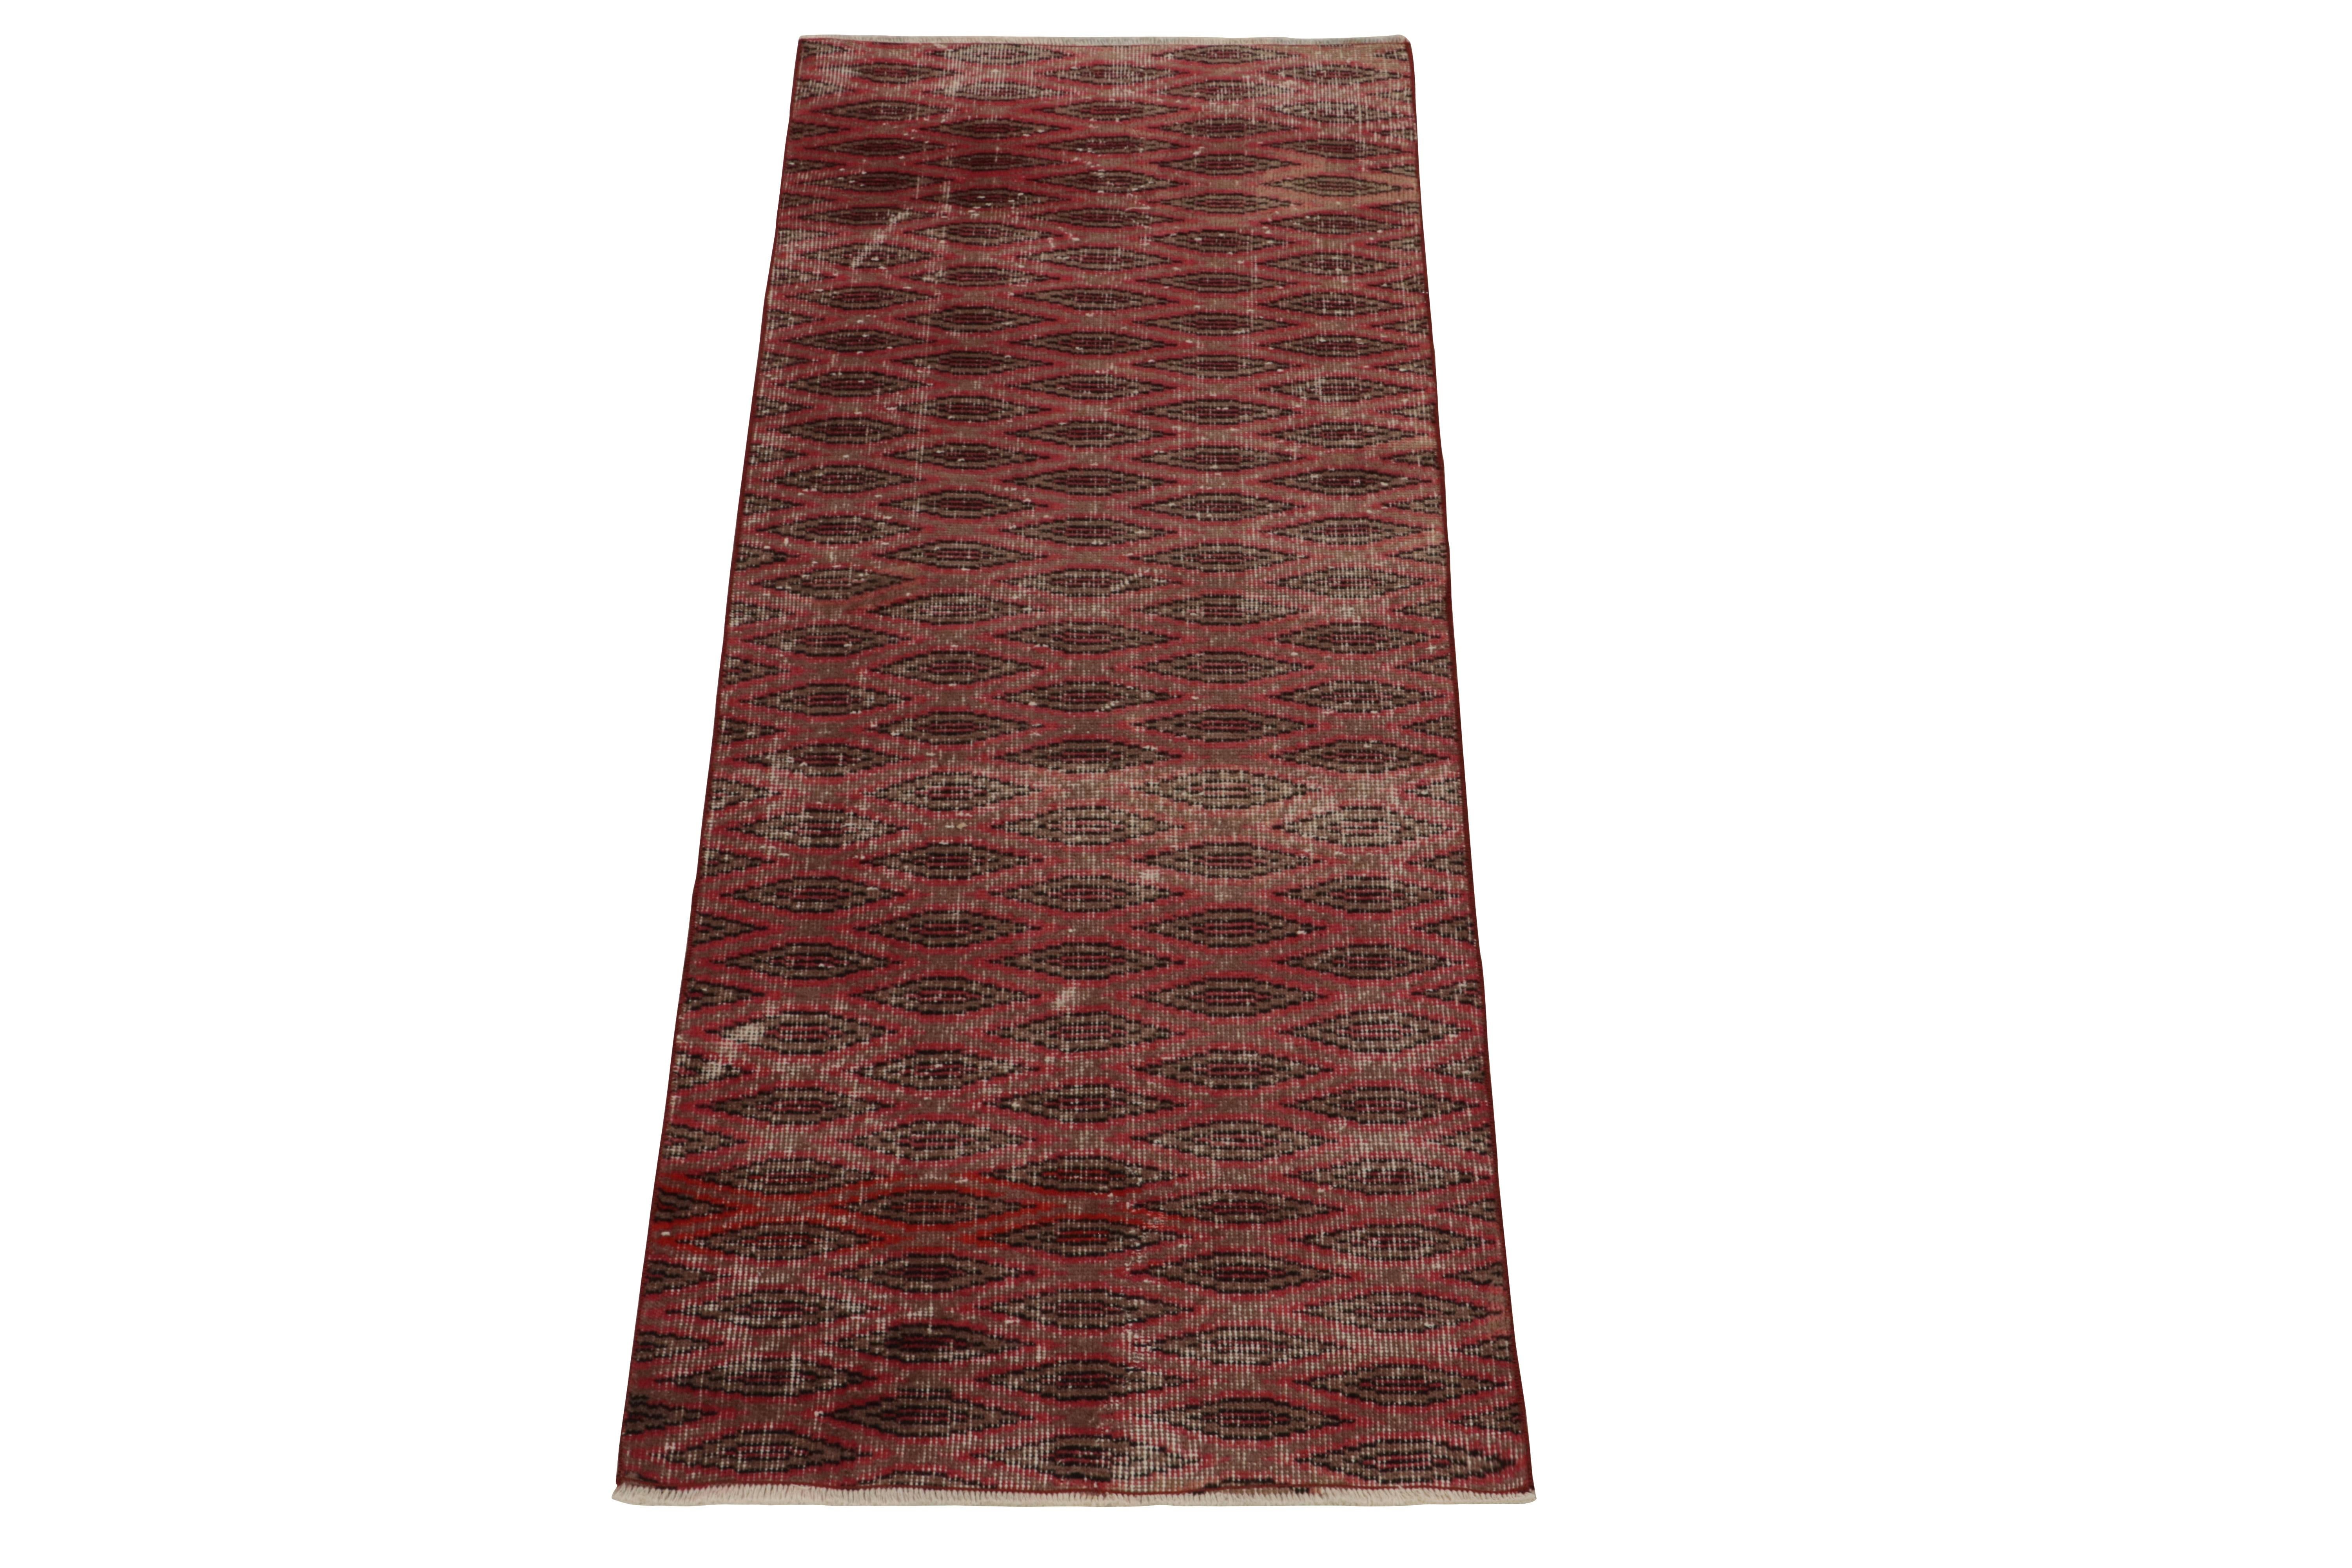 A 2 x 6 vintage runner exemplifying rare Turkish art deco sensibilities, among the latest to join our Mid Century Pasha Collection. Coming from a bold Turkish designer, this 1960s piece features a well defined geometric pattern in deep red, brown